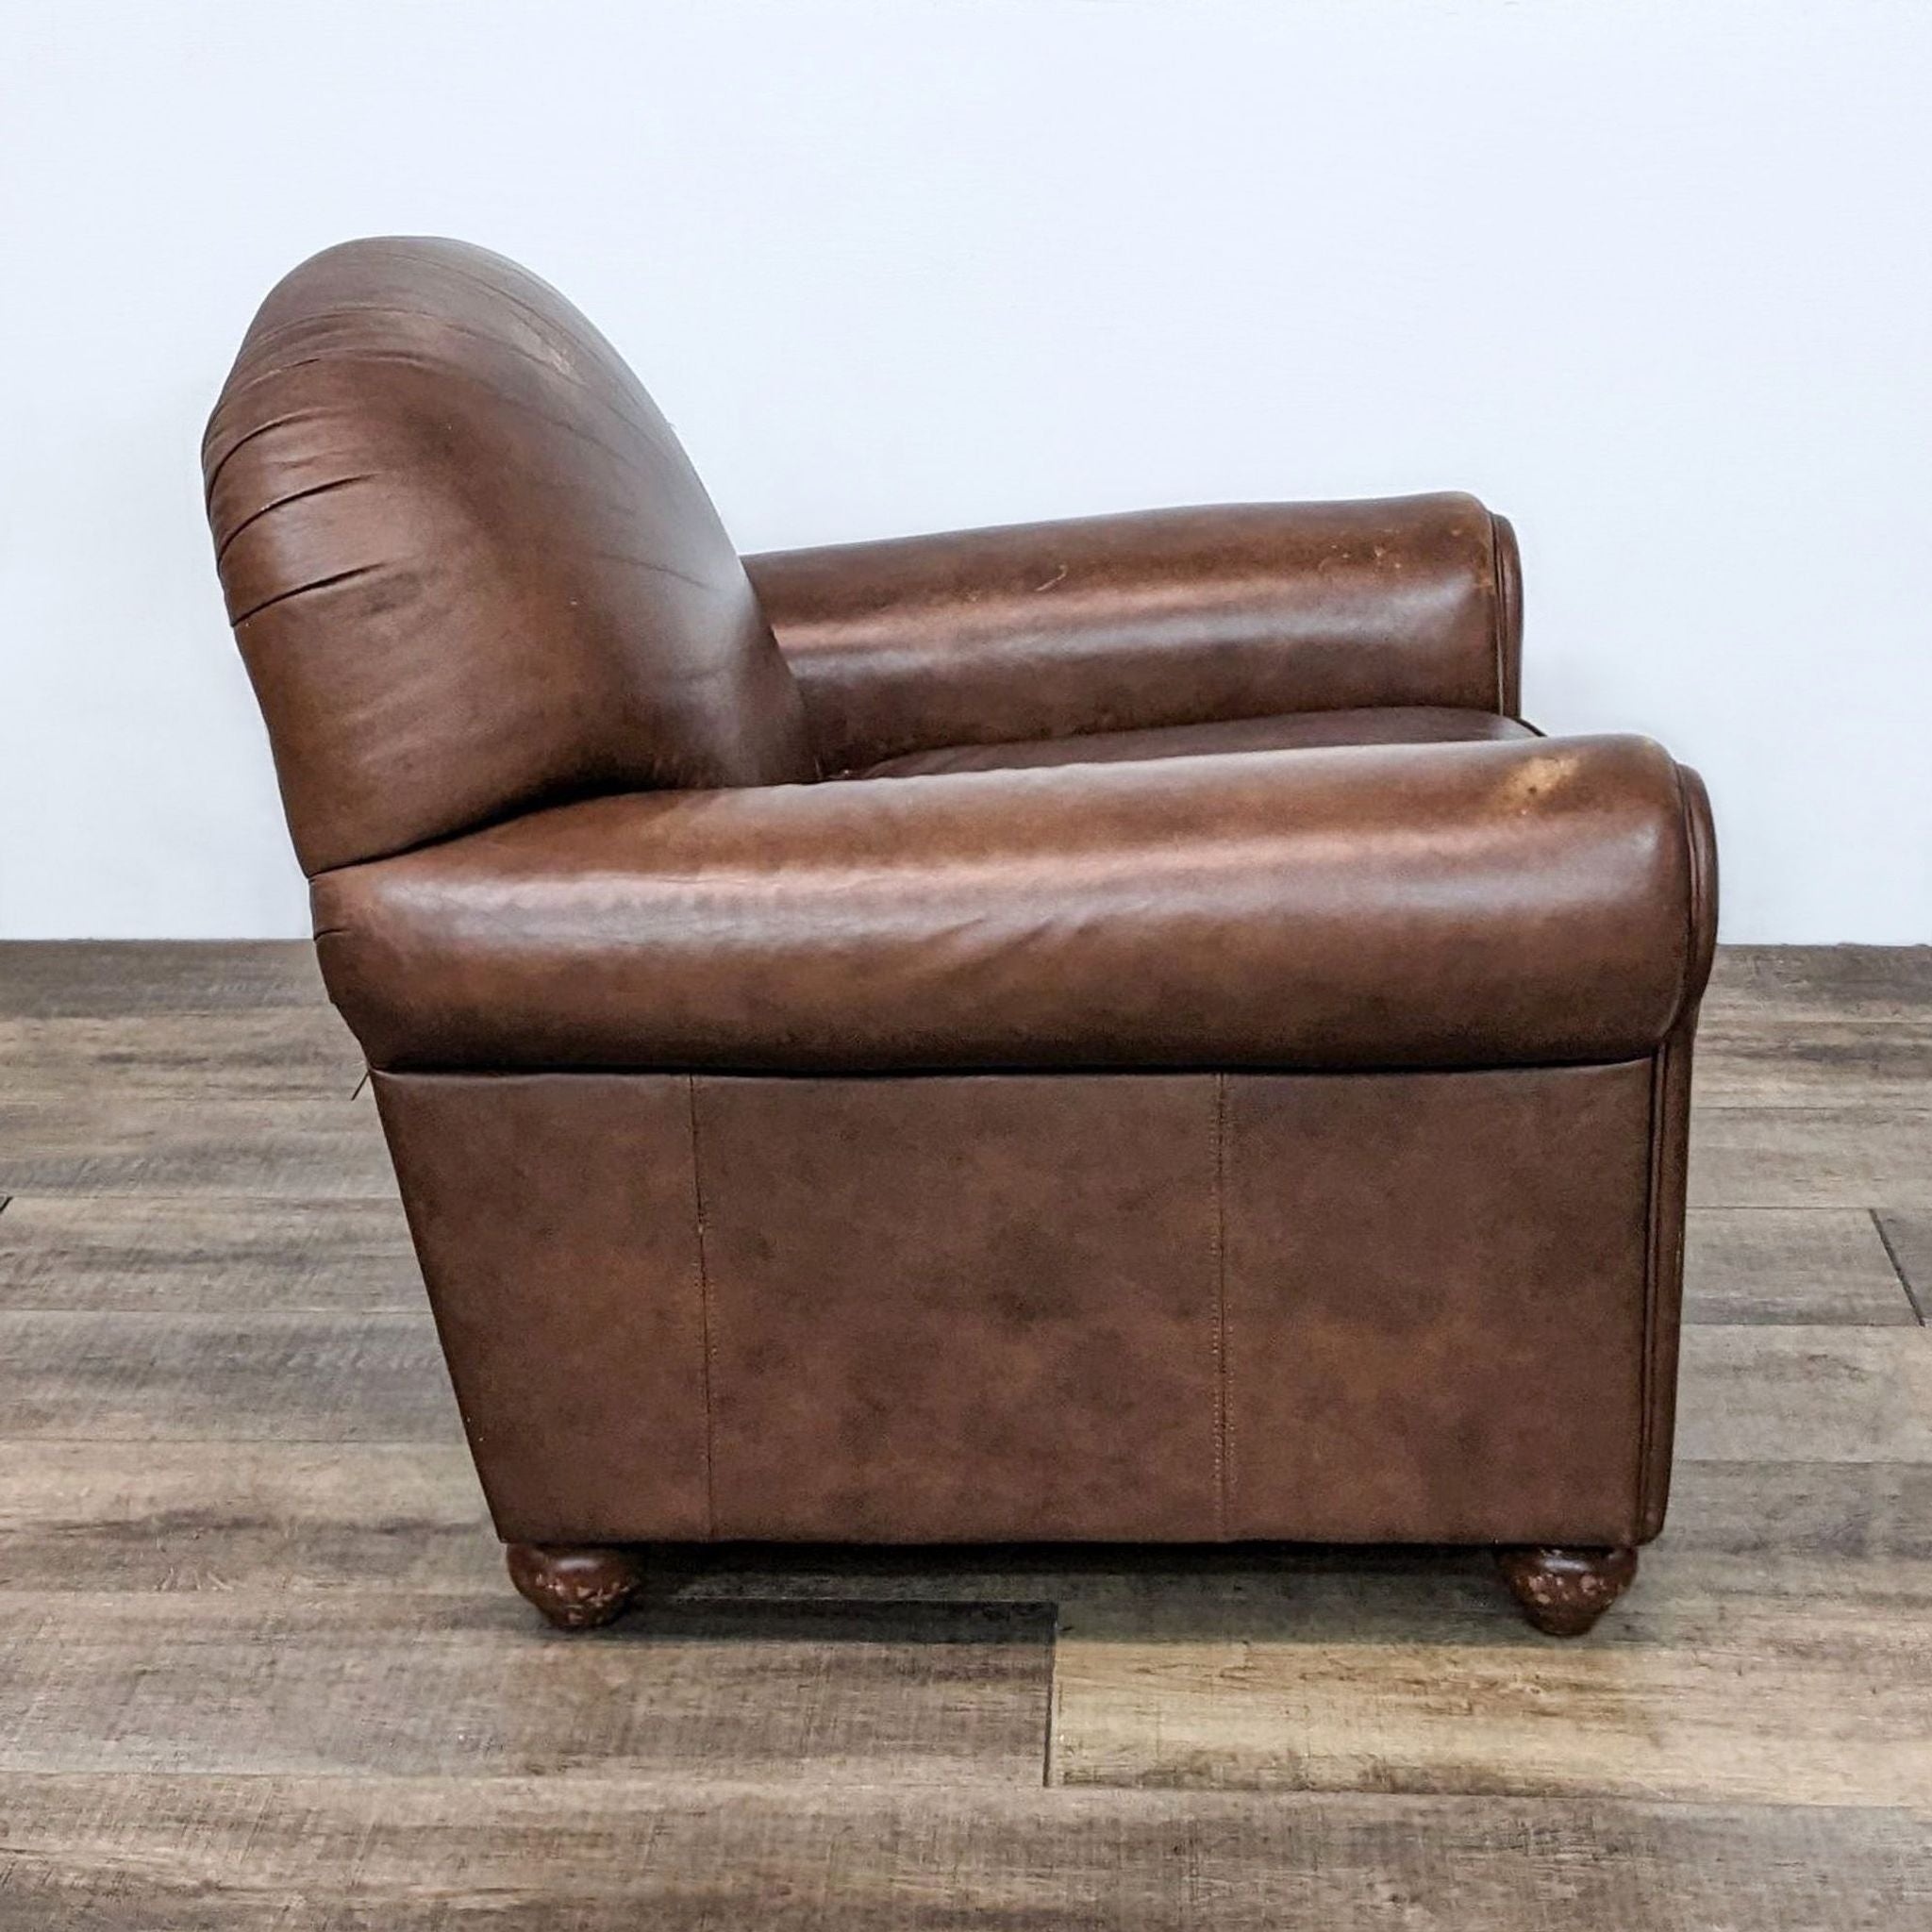 Brown Reperch contemporary club chair showcasing its profile with rolled arms and sturdy wooden feet.